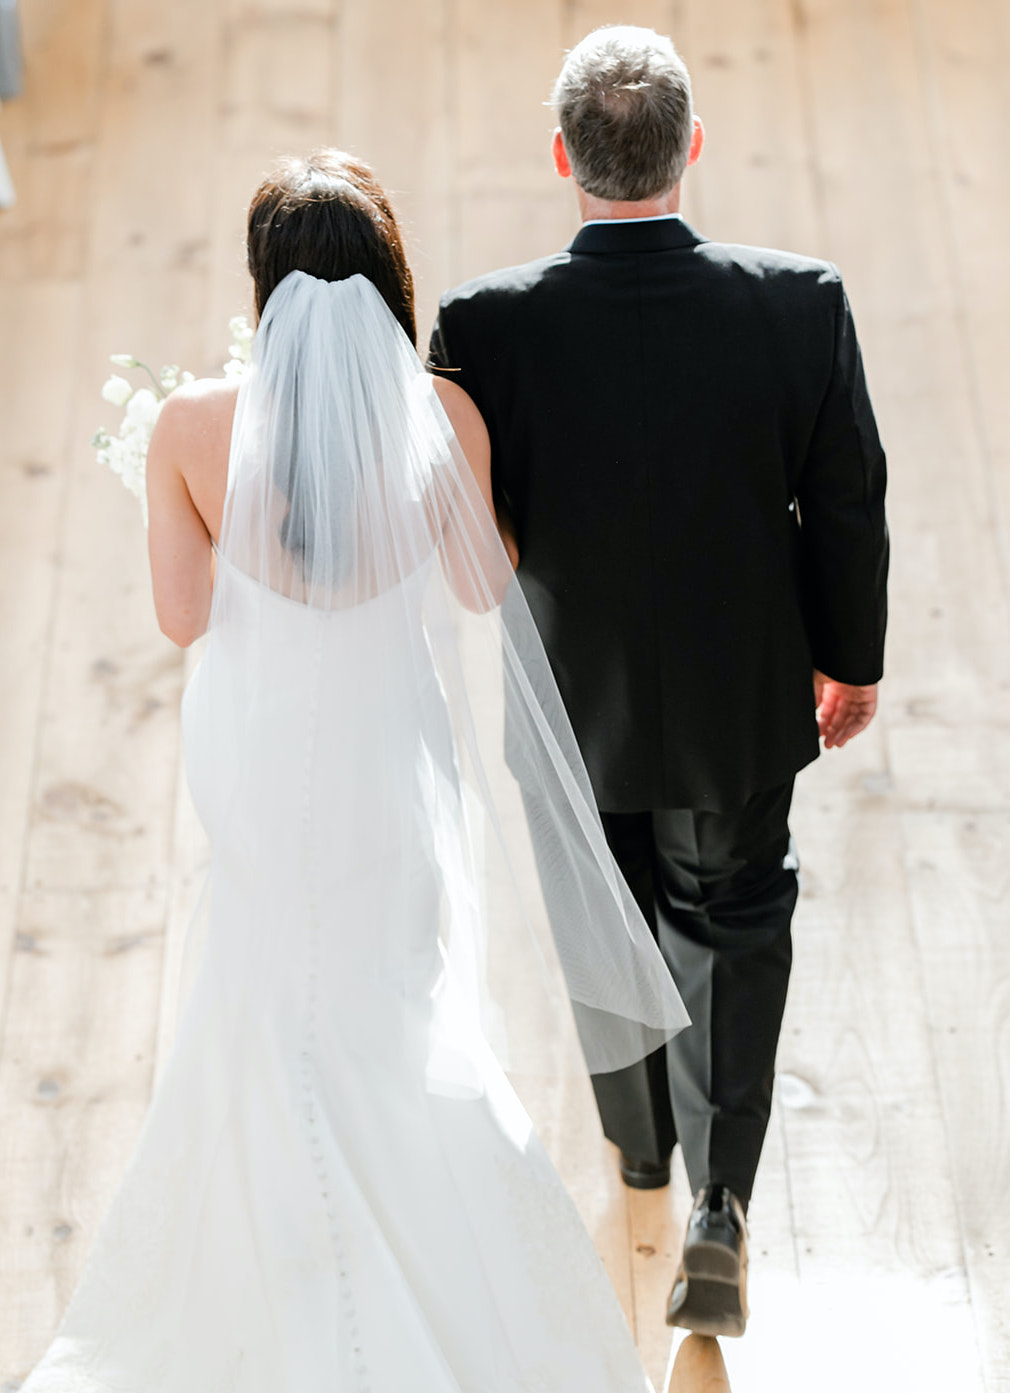 A bride walks down the aisle with her father at her elegant summer wedding.